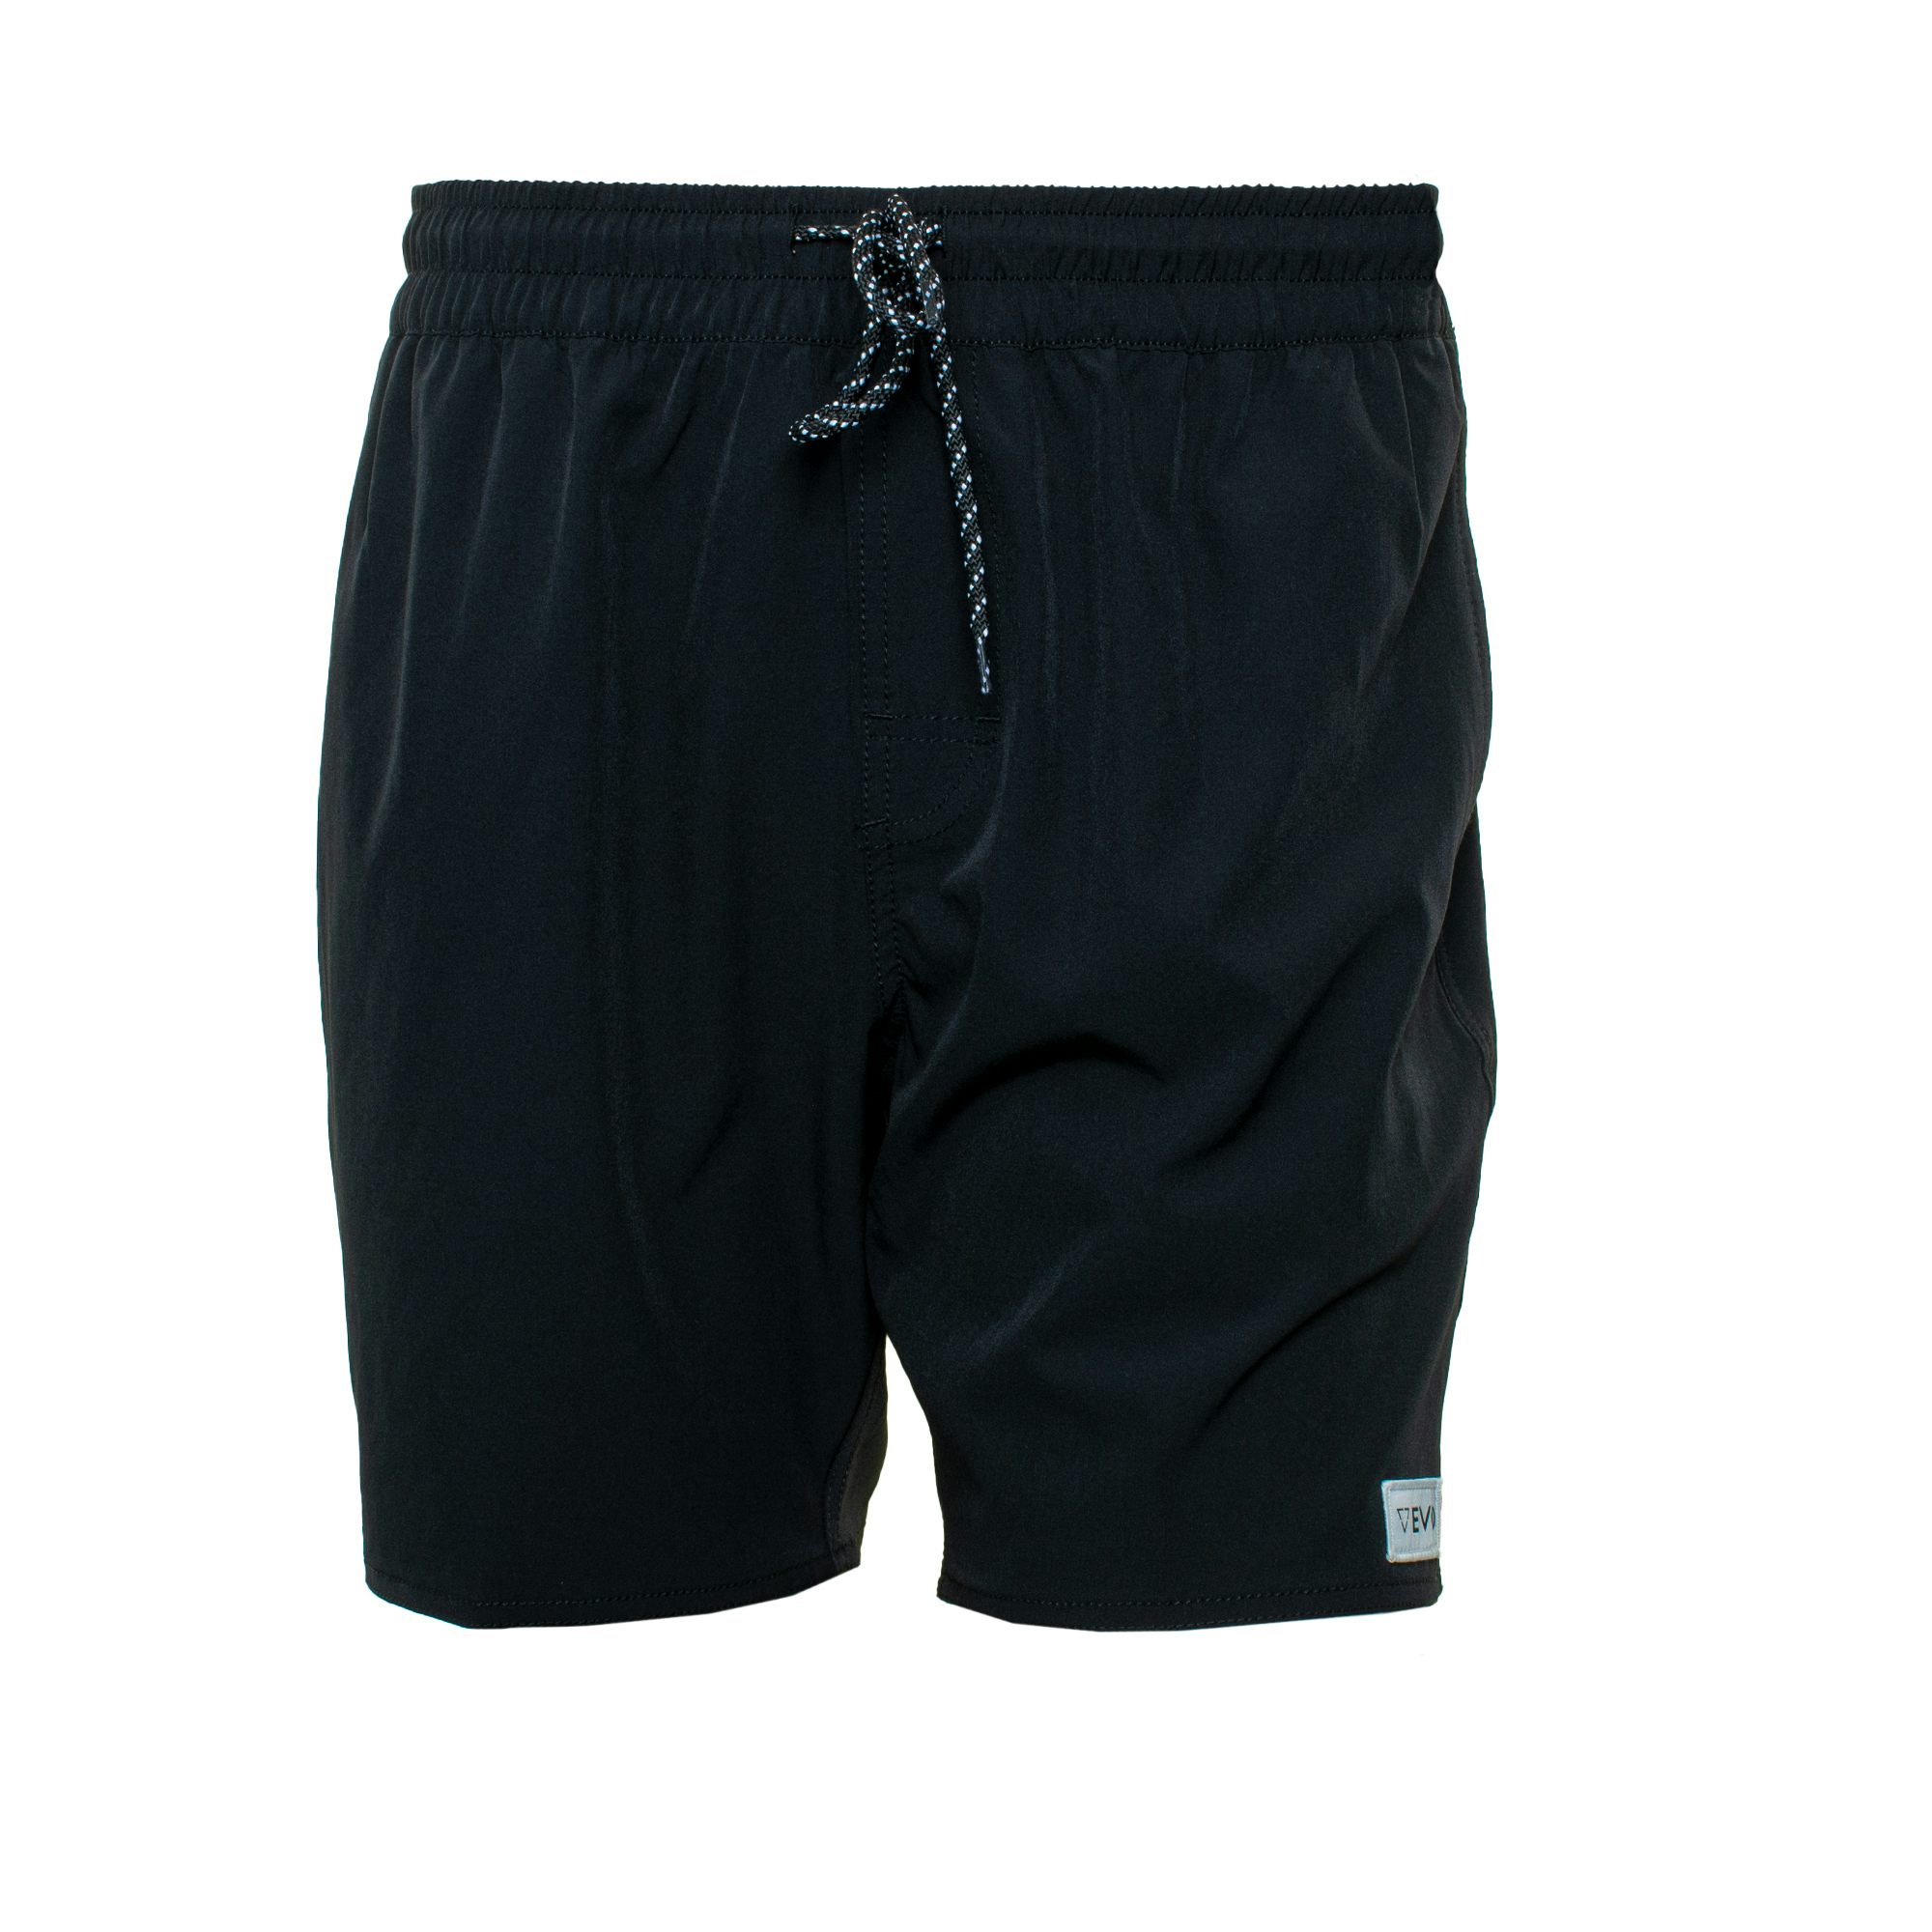 EVO Ace Volley Shorts (Men's)